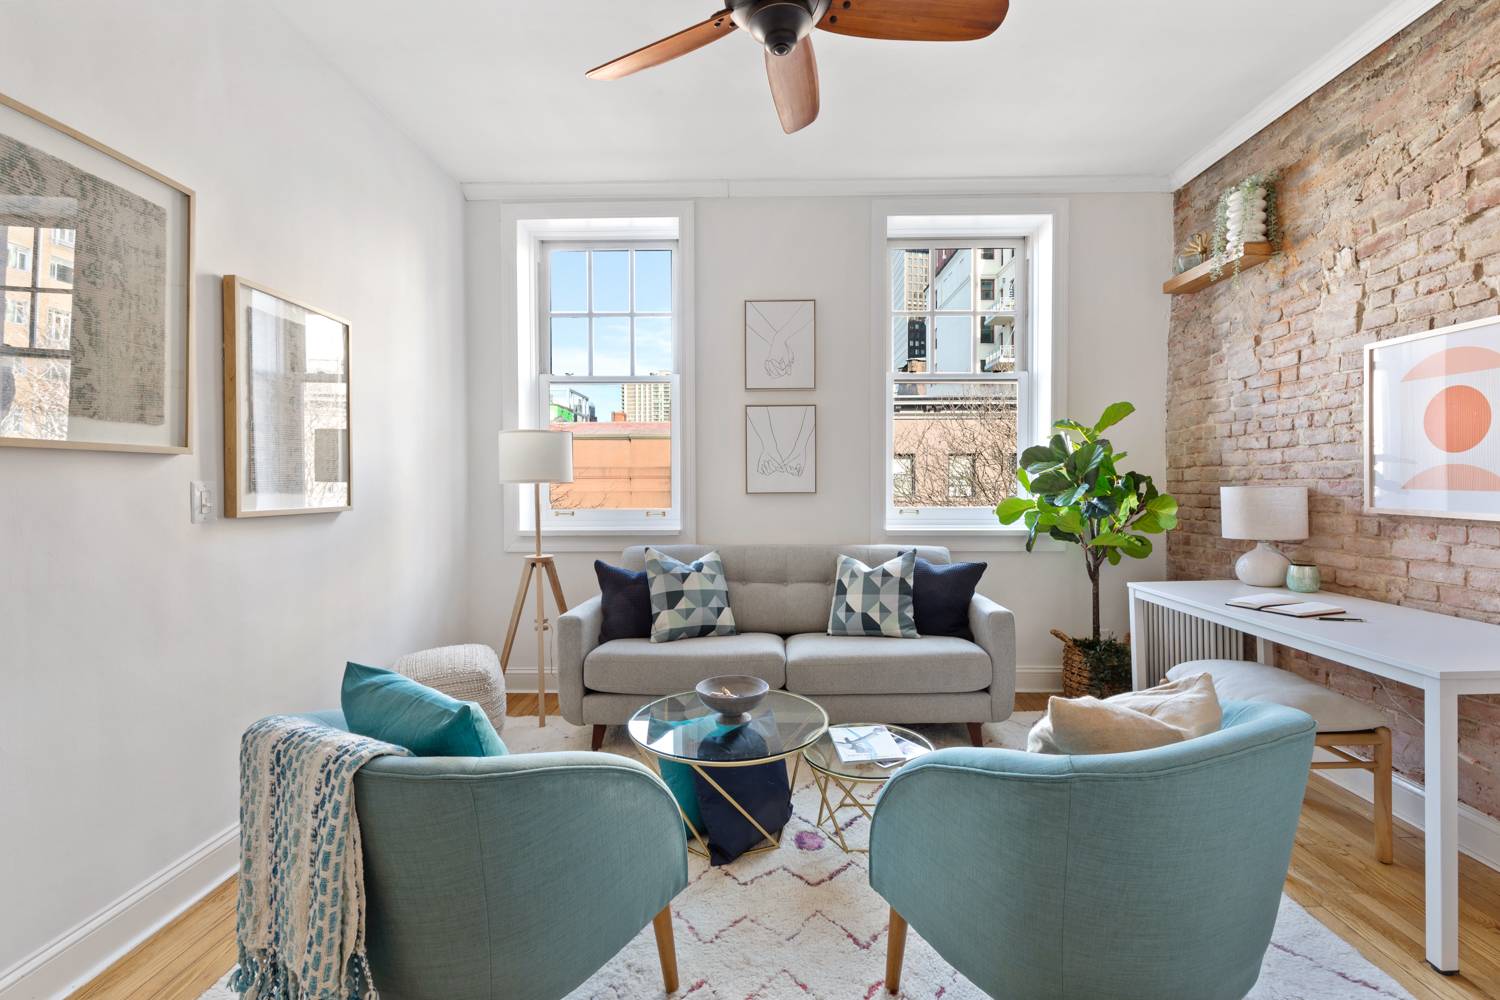 A truly special brownstone beauty in highly desirable Brooklyn Heights location.